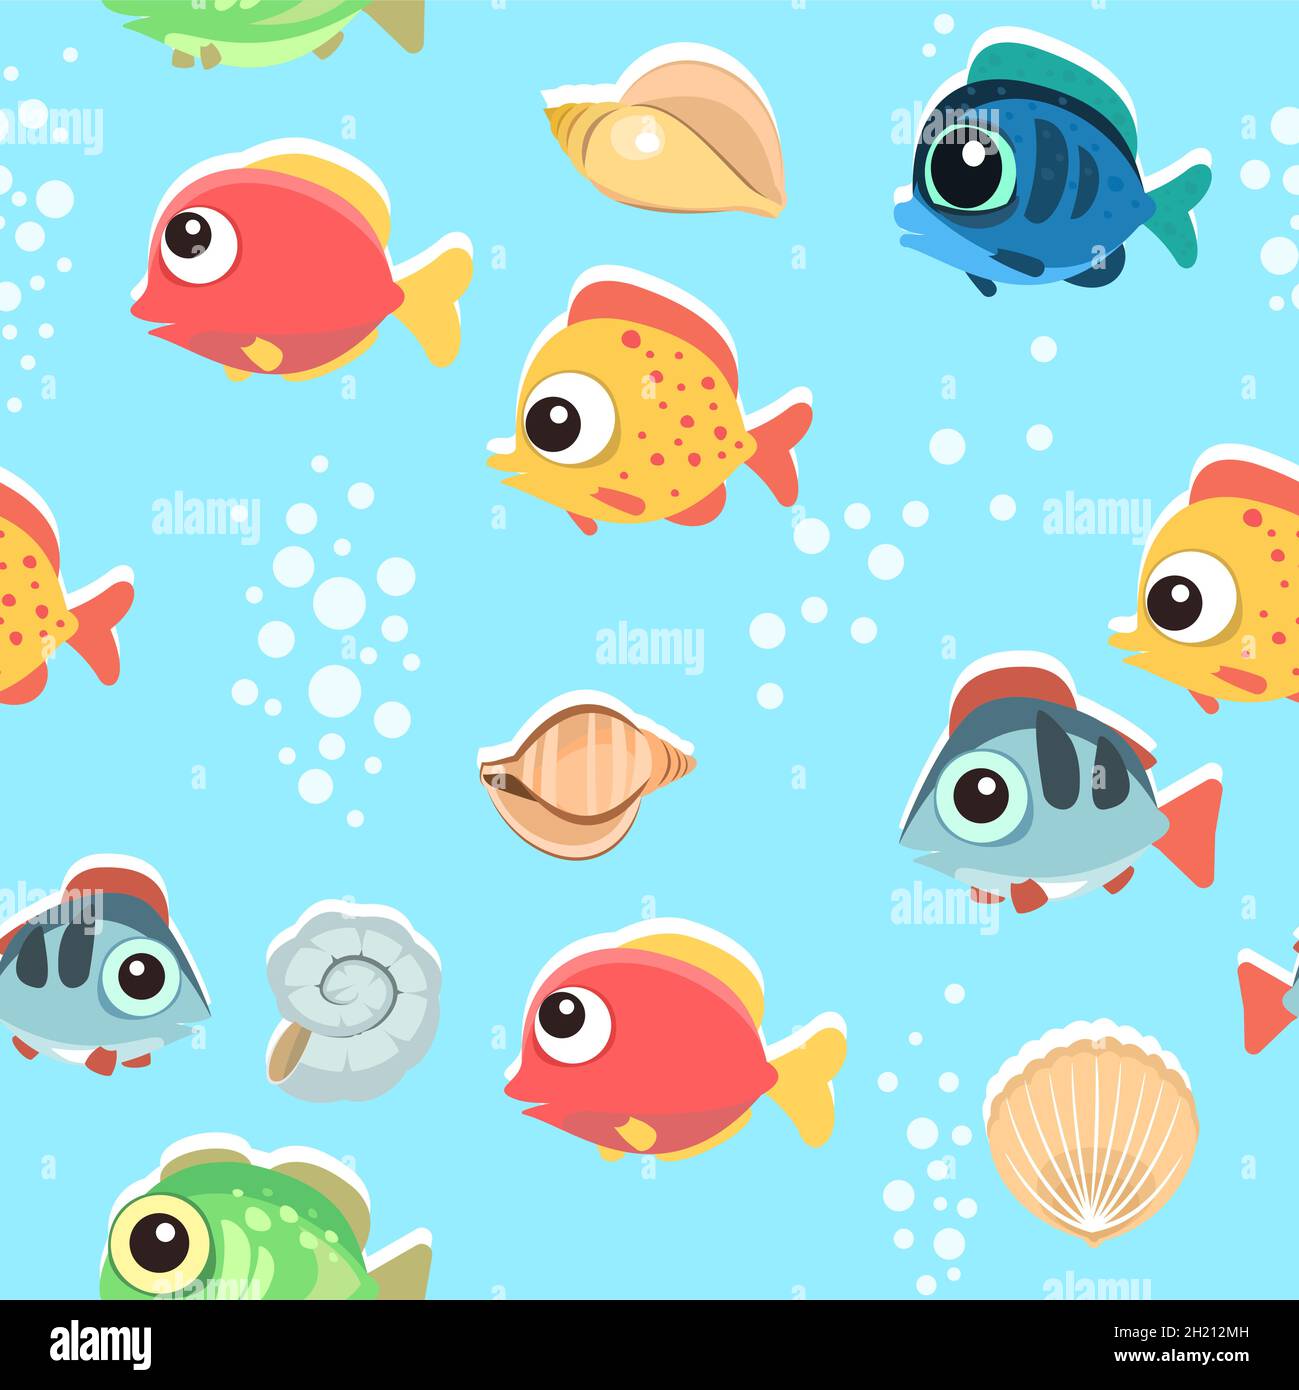  Fishing Sayings Funny with Cute Illustration of